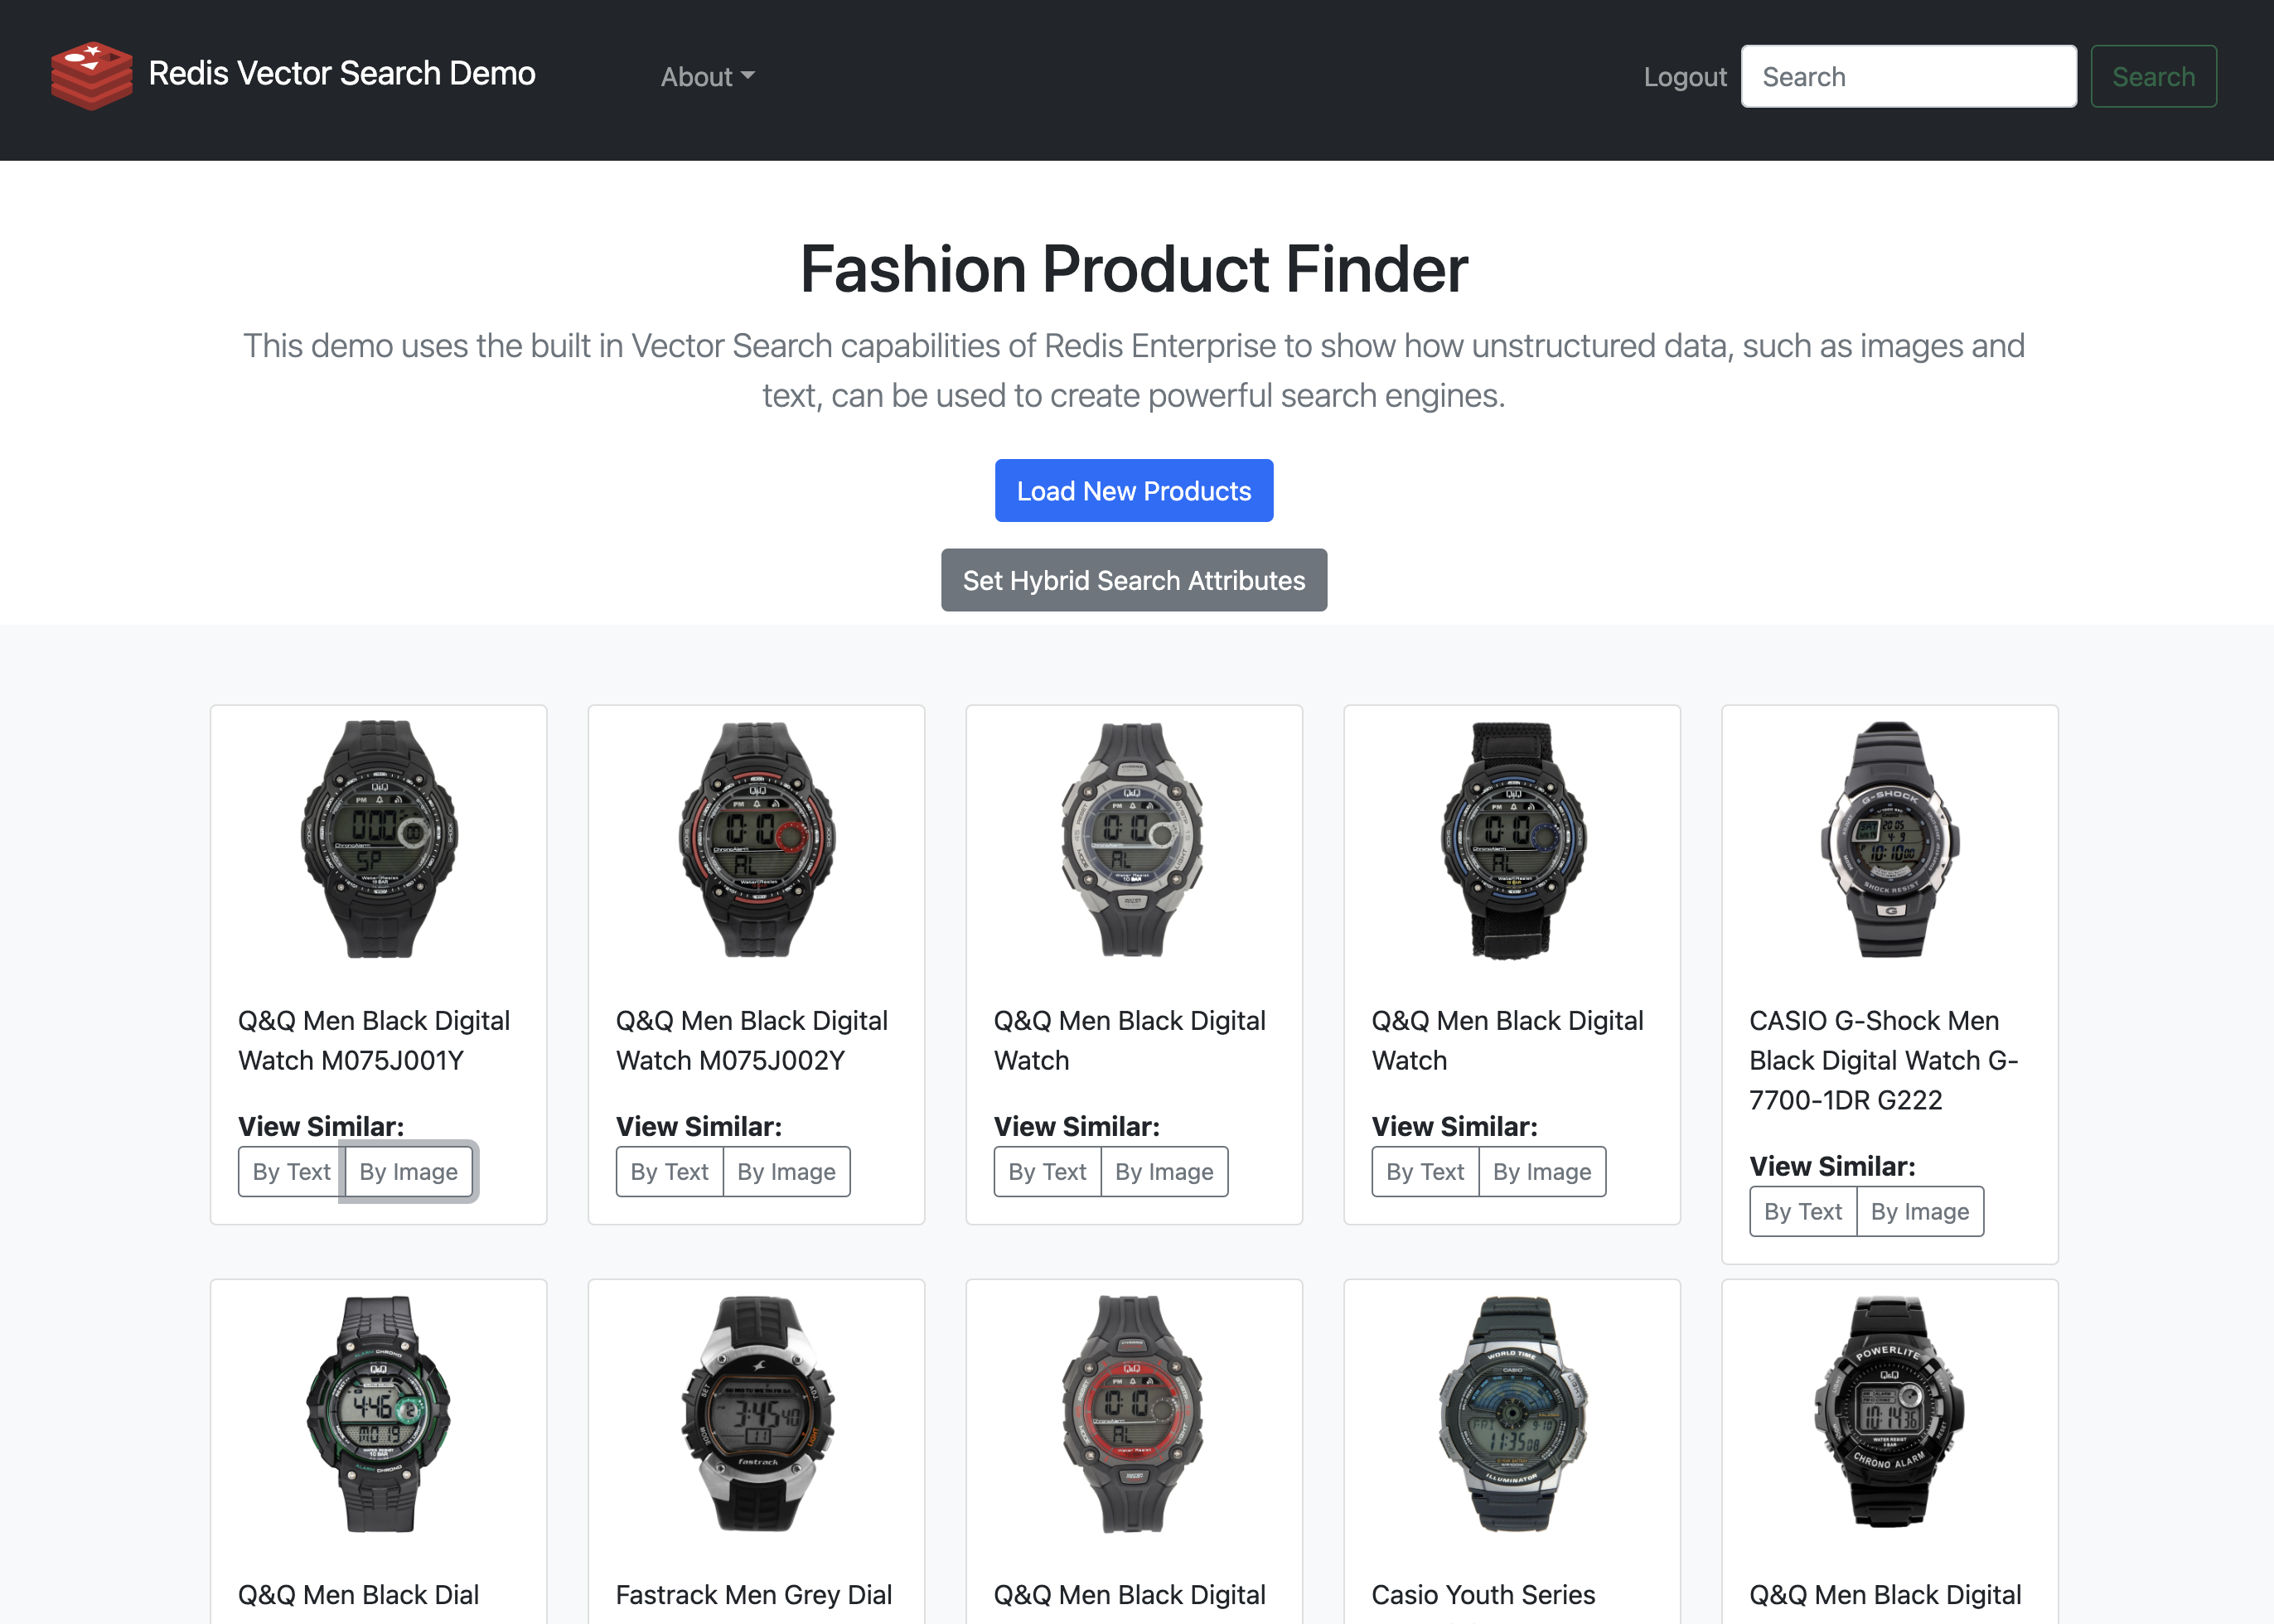 Fashion Product Finder search results